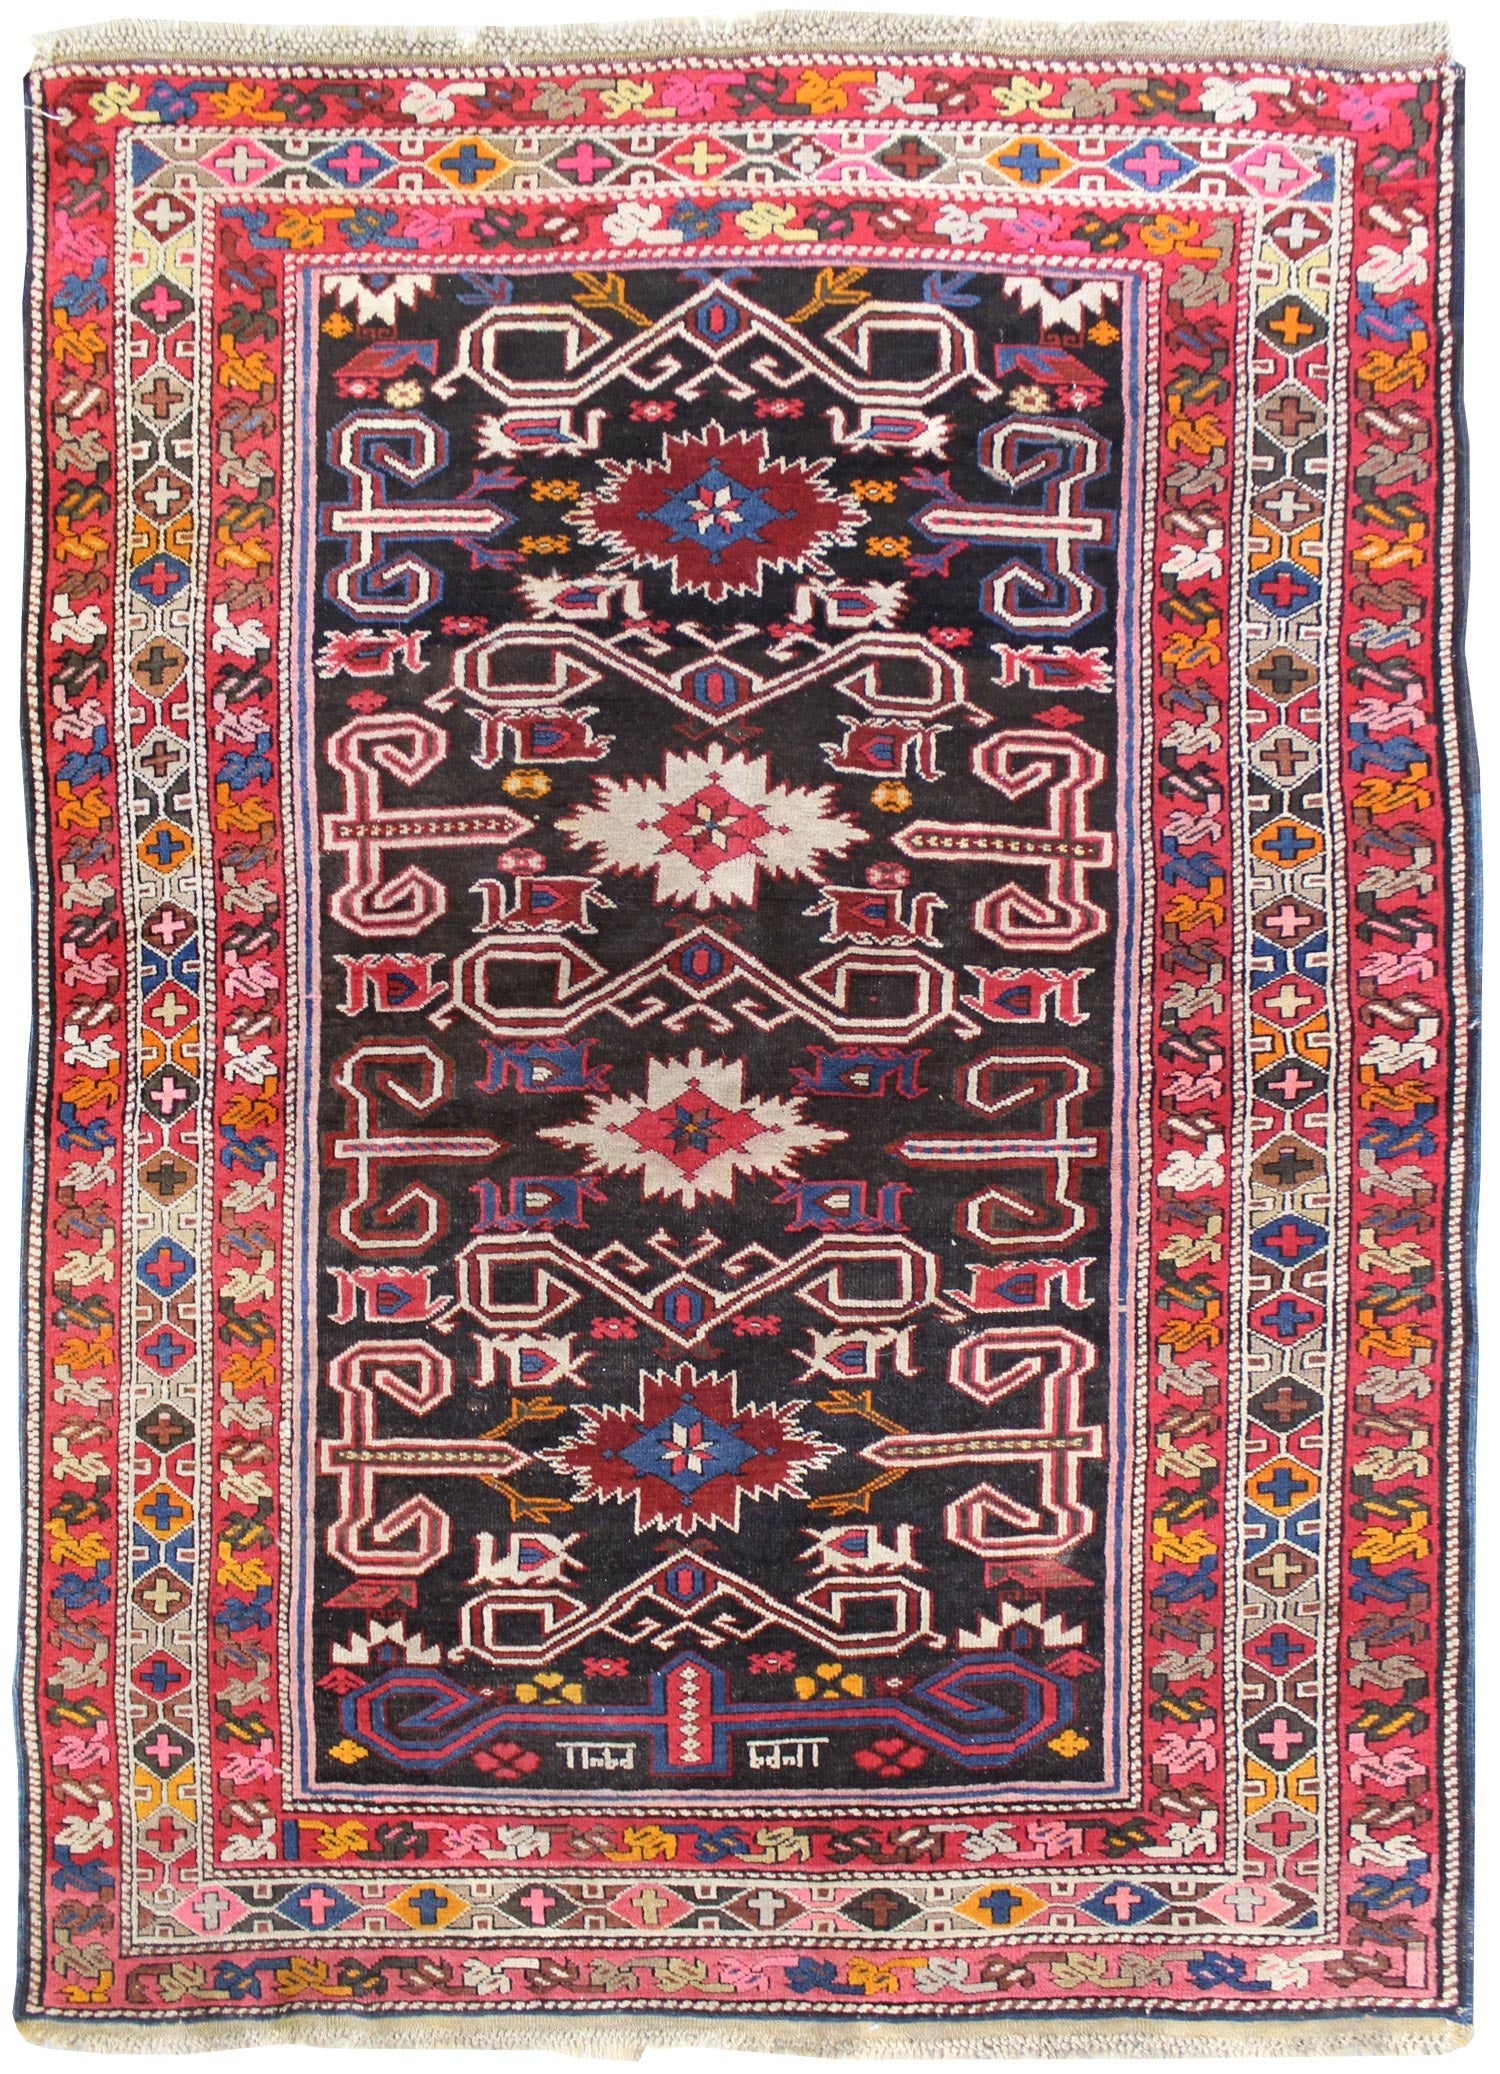 Antique Perpadil Handwoven Tribal Rug